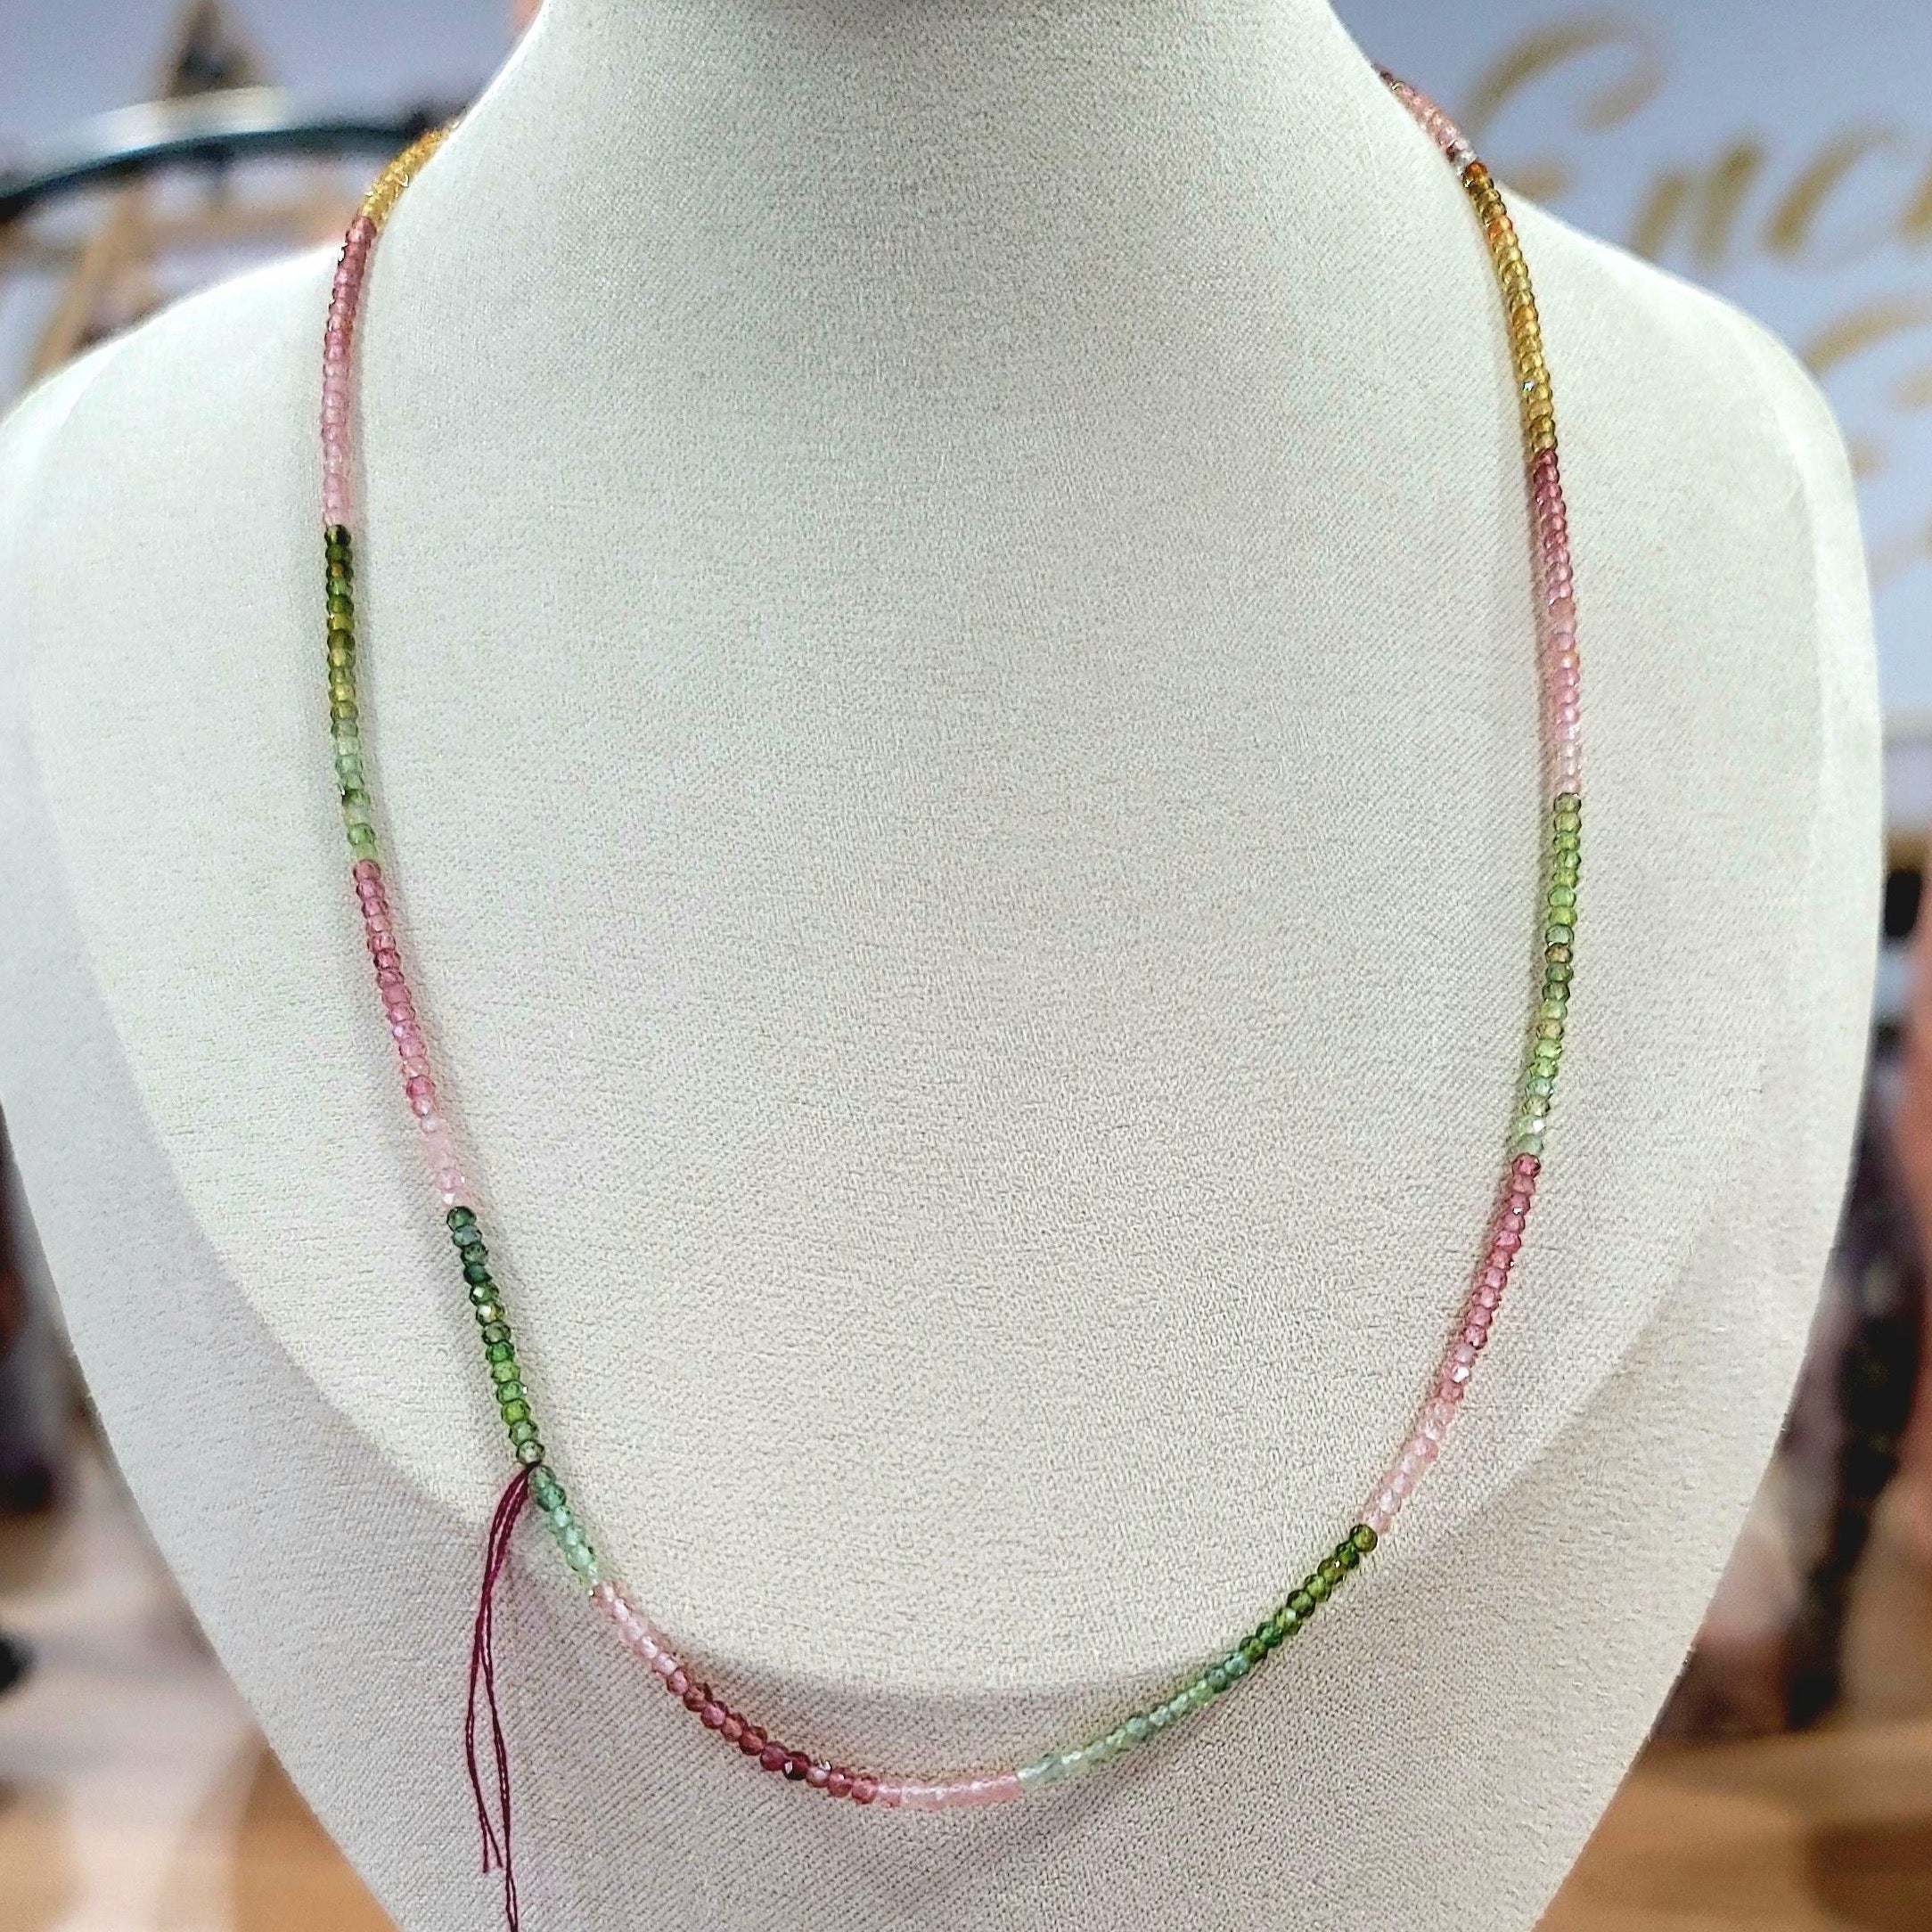 Watermelon Tourmaline Waterfall Micro Faceted Necklace